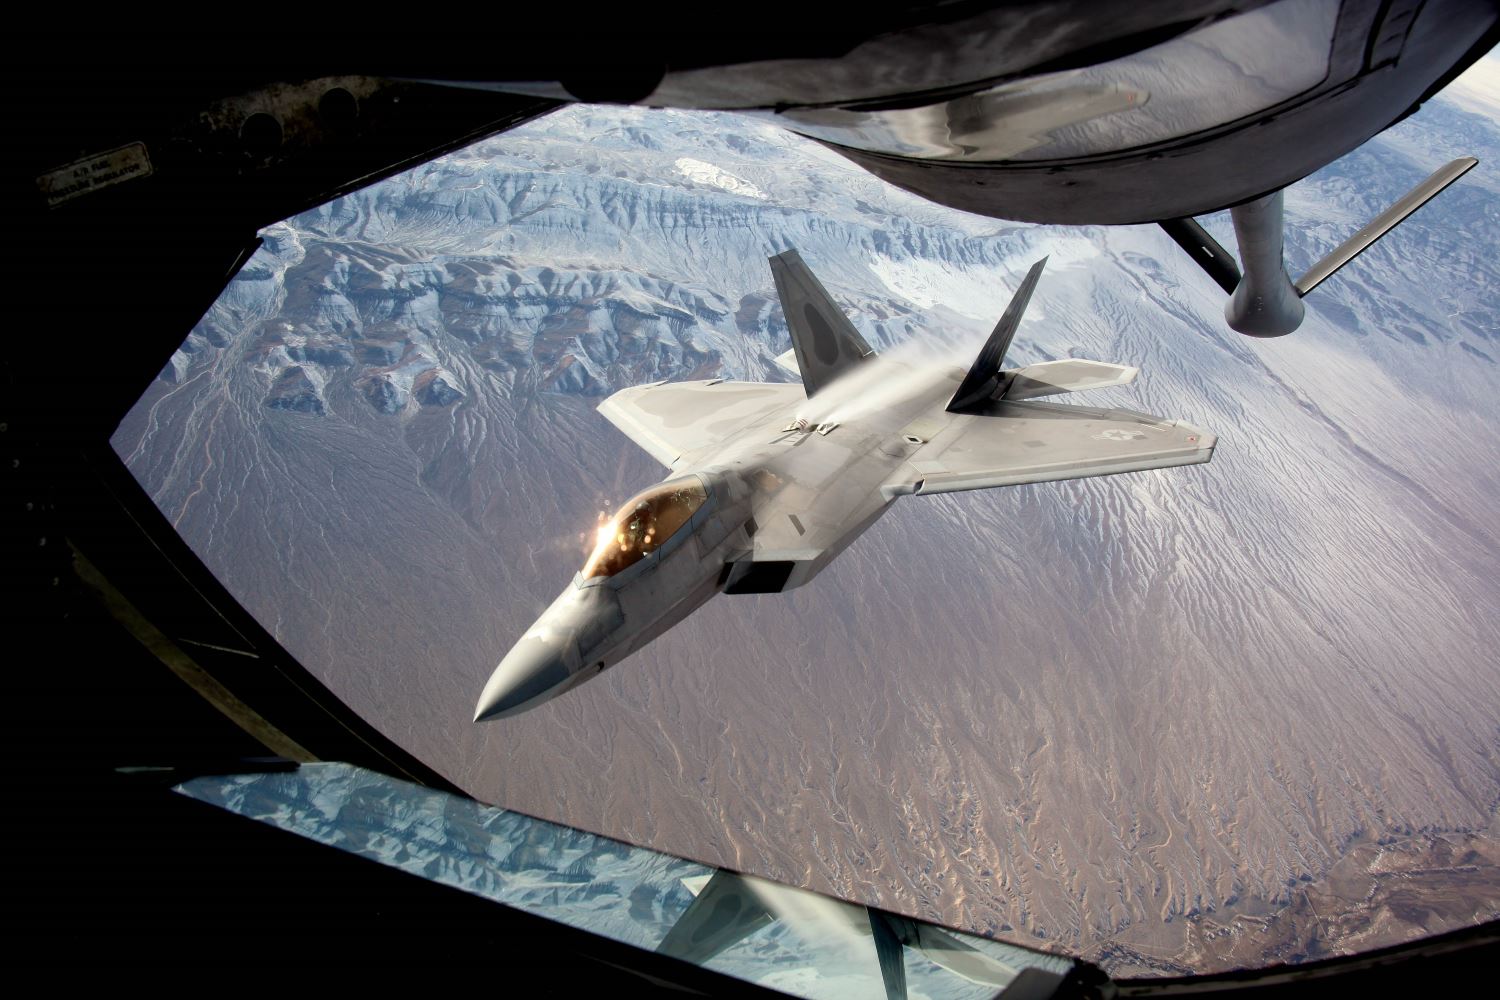 An F-22 Raptor, assigned to the 95th Fighter Squadron at Tyndall Air Force Base, Fla., disconnects from the boom of a KC-135 Stratotanker after receiving fuel to continue on its training sortie during exercise Red Flag 16-1 Feb. 4, 2016. The high-tempo exercise incorporates both day and night missions that give aircrews an opportunity to experience advanced, relevant, and realistic combat-like situations in a controlled environment to increase their ability to complete missions and safely return home. (U.S. Air Force photo/Master Sgt. Burt Traynor)